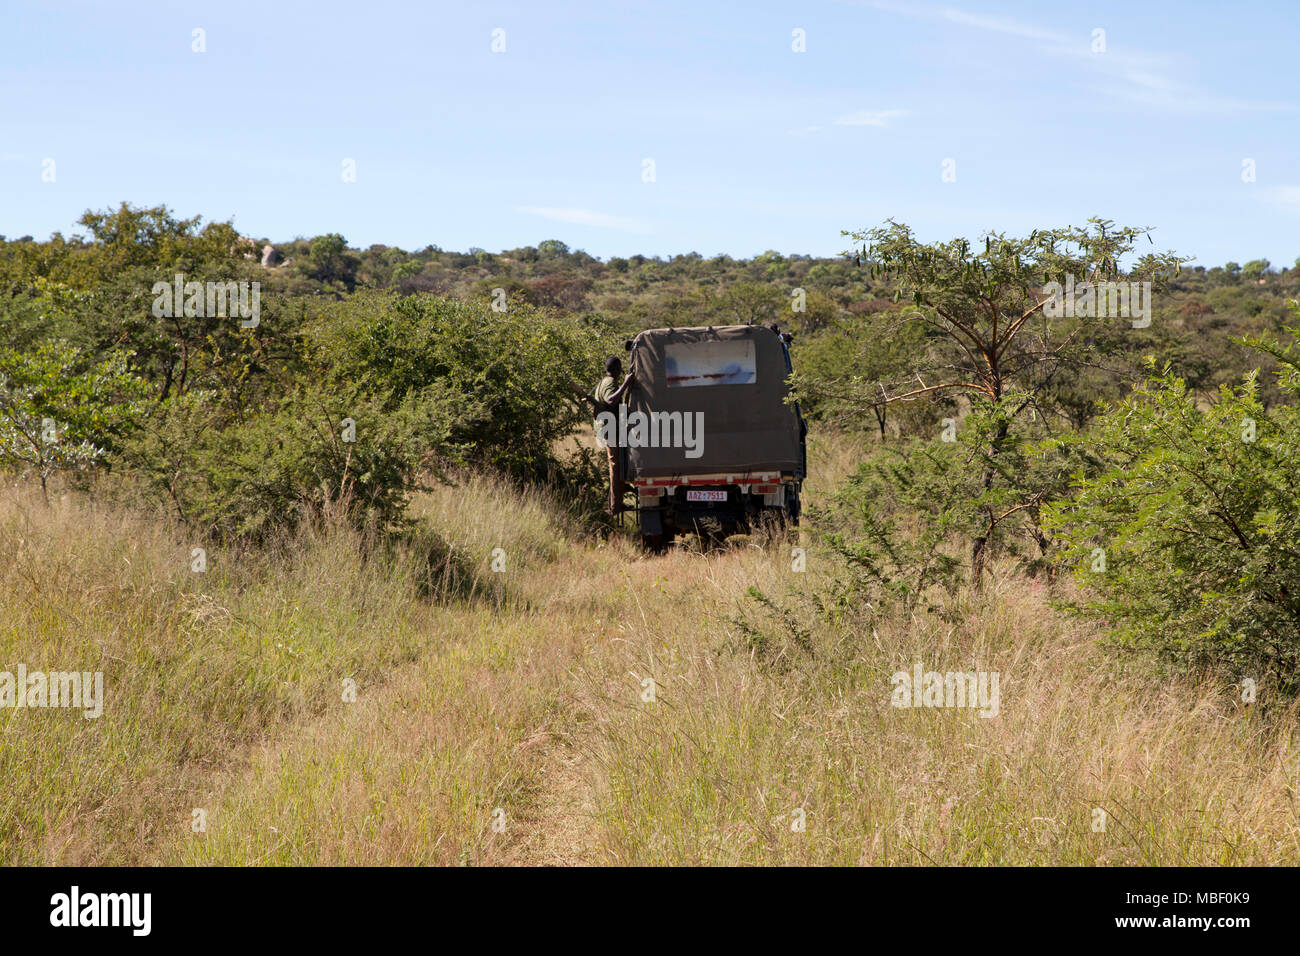 An armed guide stands on the back of an off-road vehicle in Matobo National Park, Zimbabwe. The vehicle travels in the bush. Stock Photo